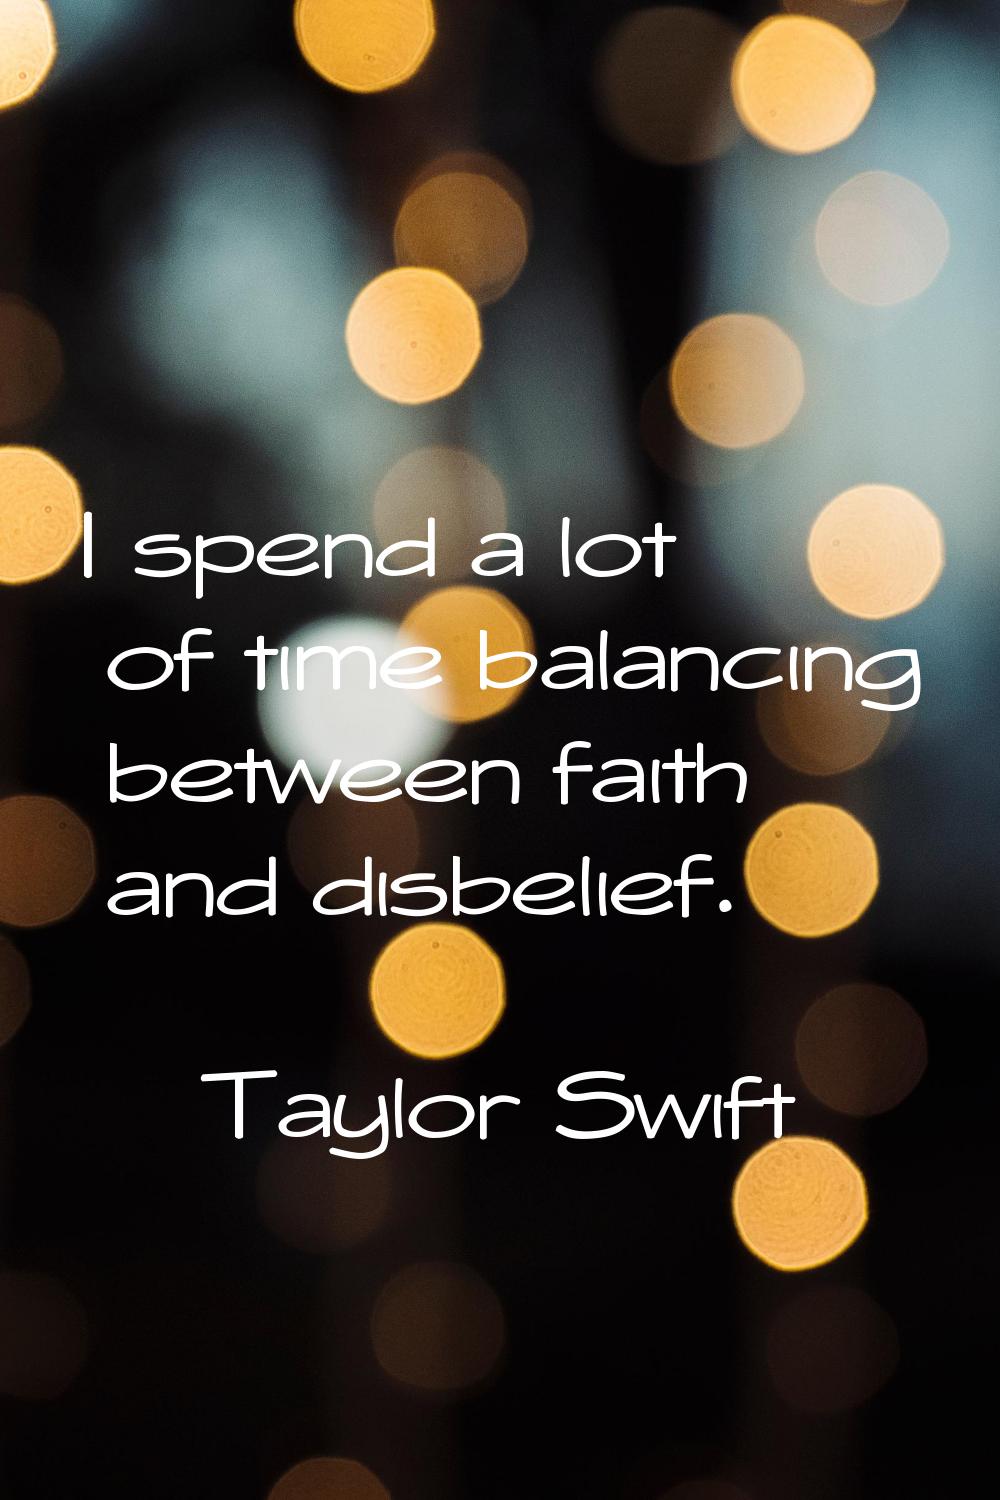 I spend a lot of time balancing between faith and disbelief.